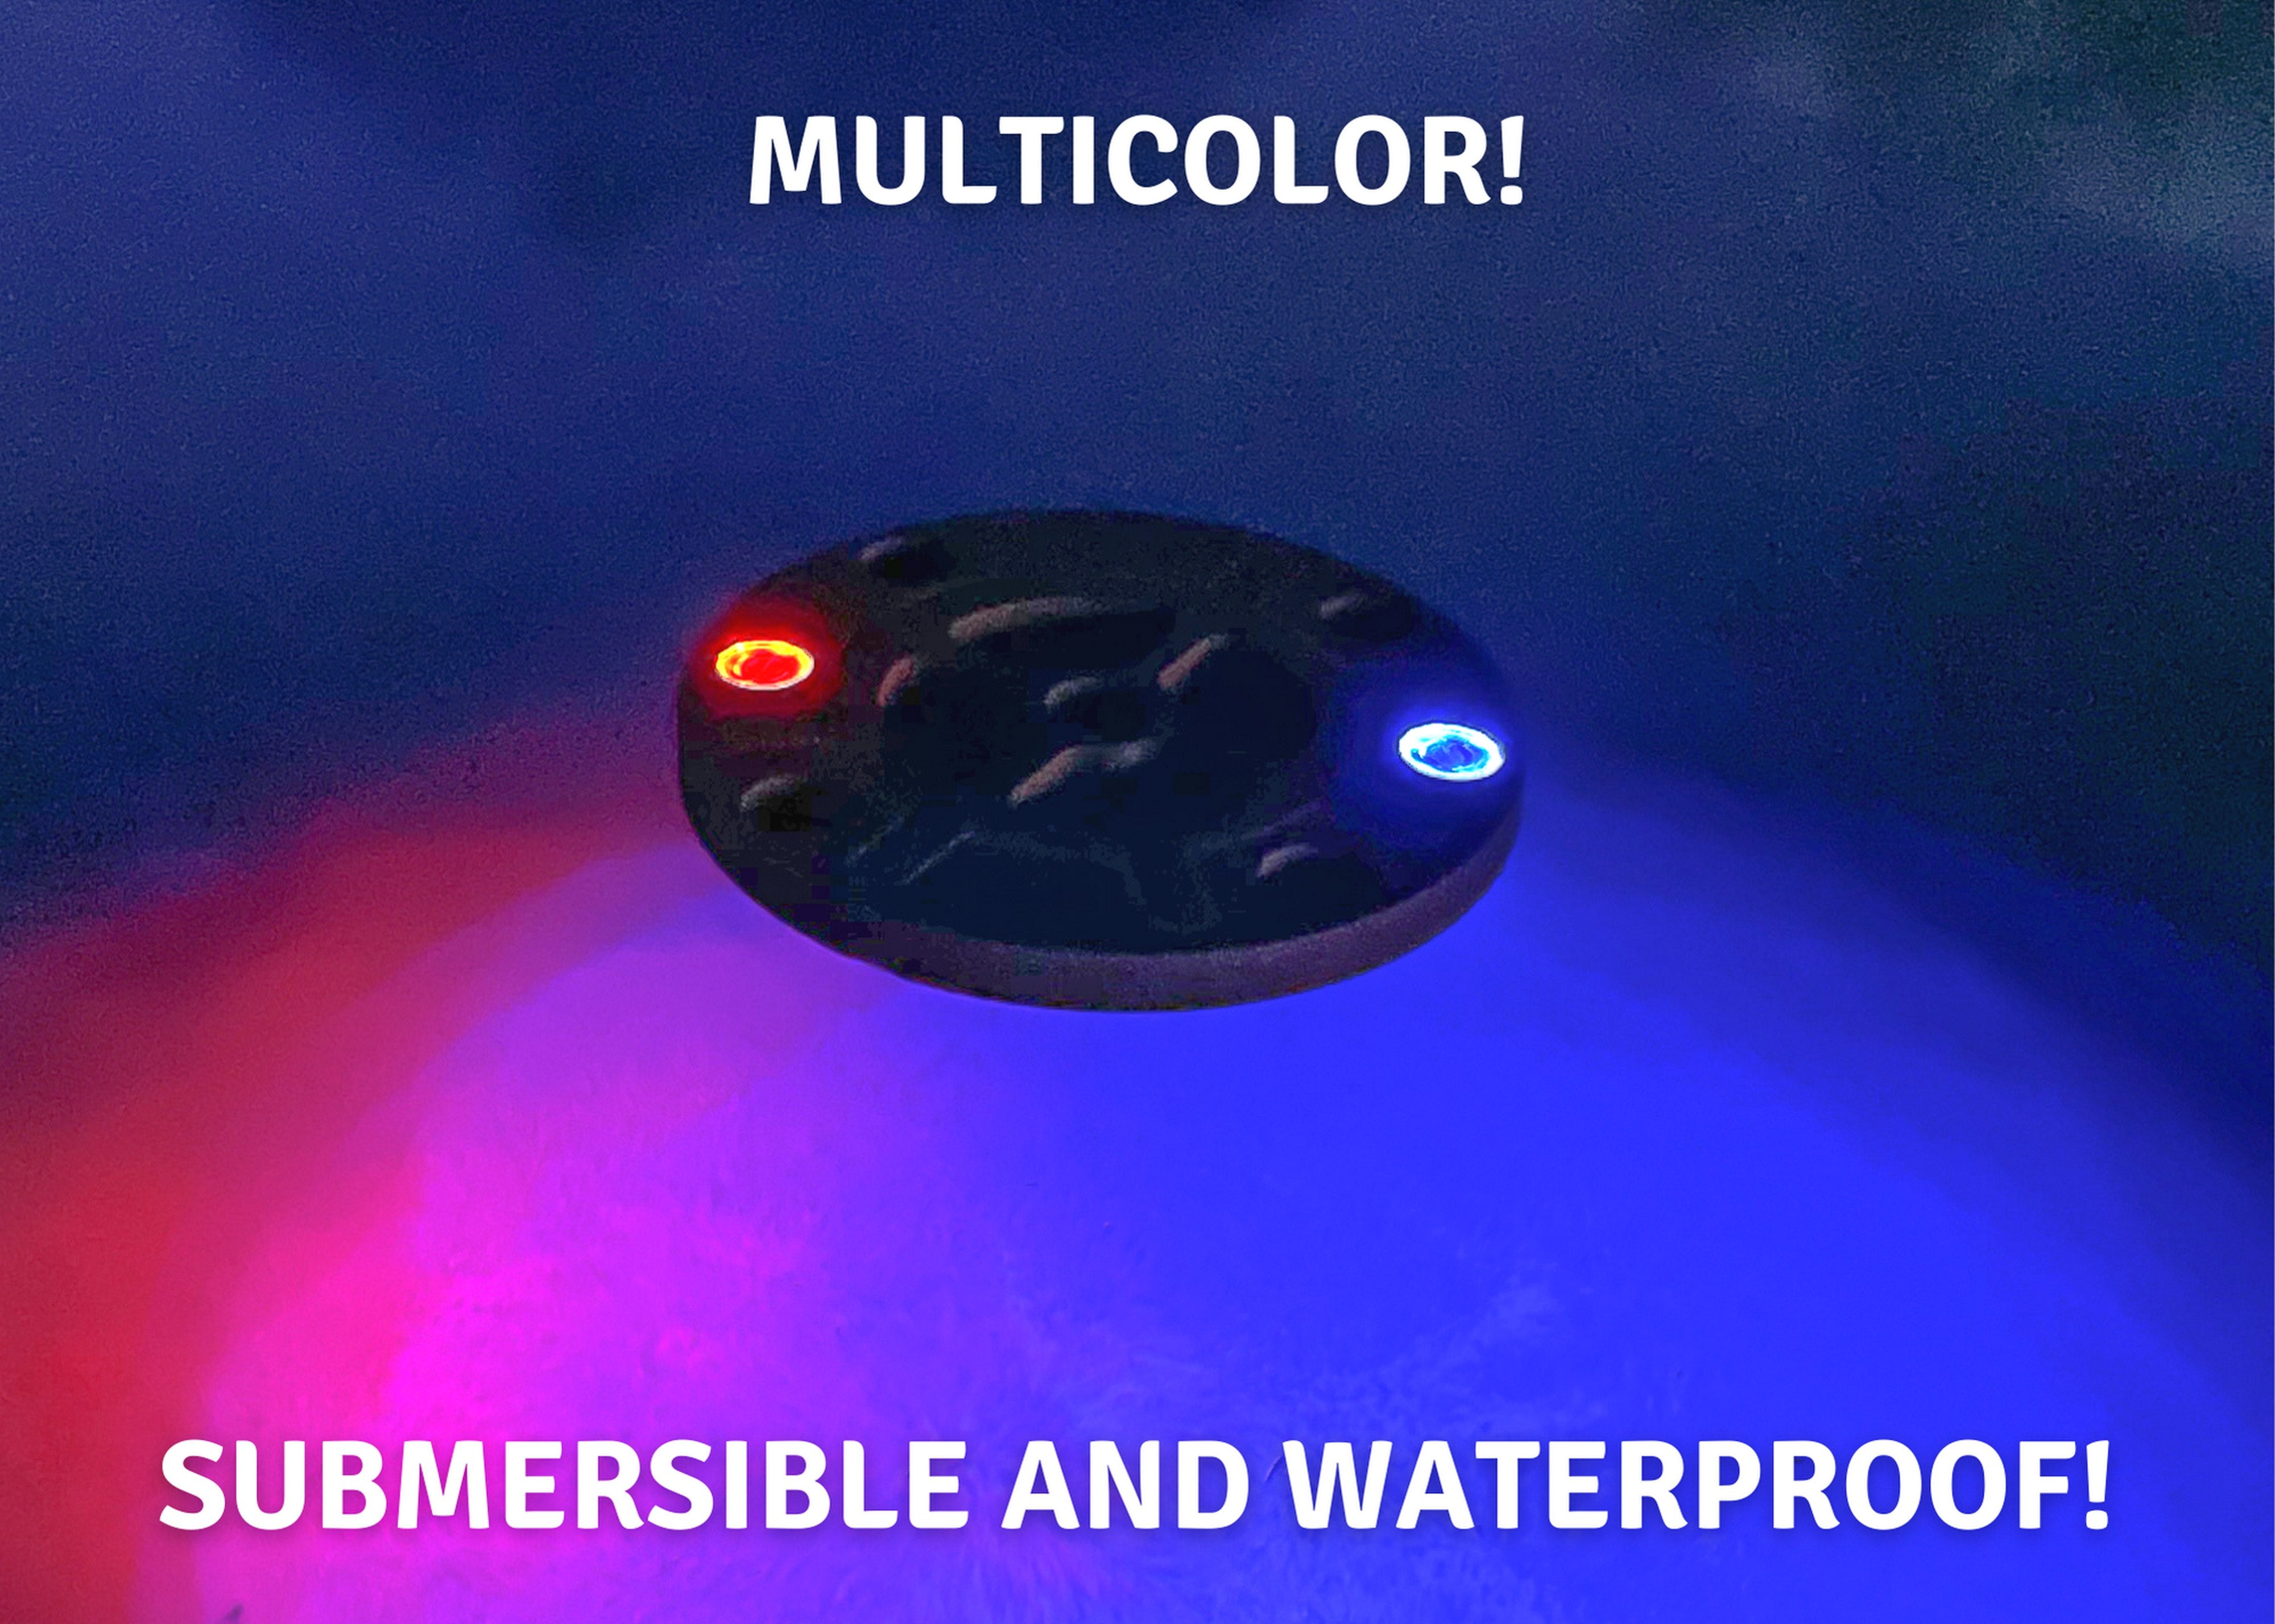 Ship Wheel Drink Holder Super Bright Color LED Lights Refreshment Table Tray Pool Party Float Lounge Durable Foam 5 Compartment UV Resistant 2 Feet